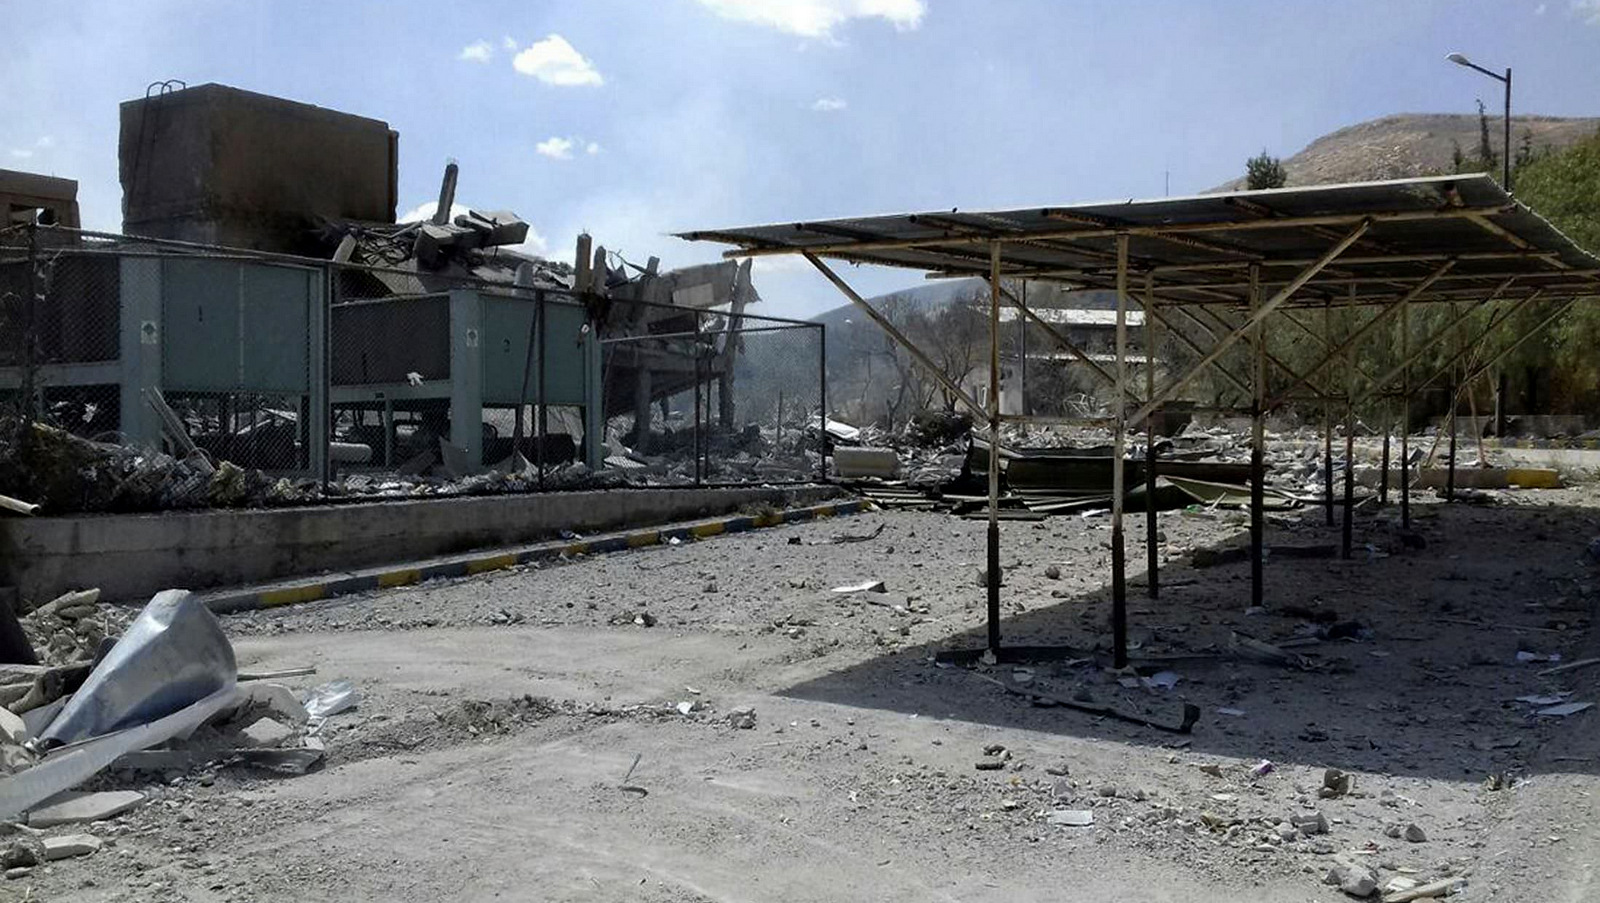 The damage of the Syrian Scientific Research Center which was attacked by U.S., British and French military strikes in Barzeh, near Damascus, Syria, April 14, 2018. Russia's military said Syrian air defense units downed 71 out of 103 cruise missiles launched by the U.S. and its allies. (SANA via AP)